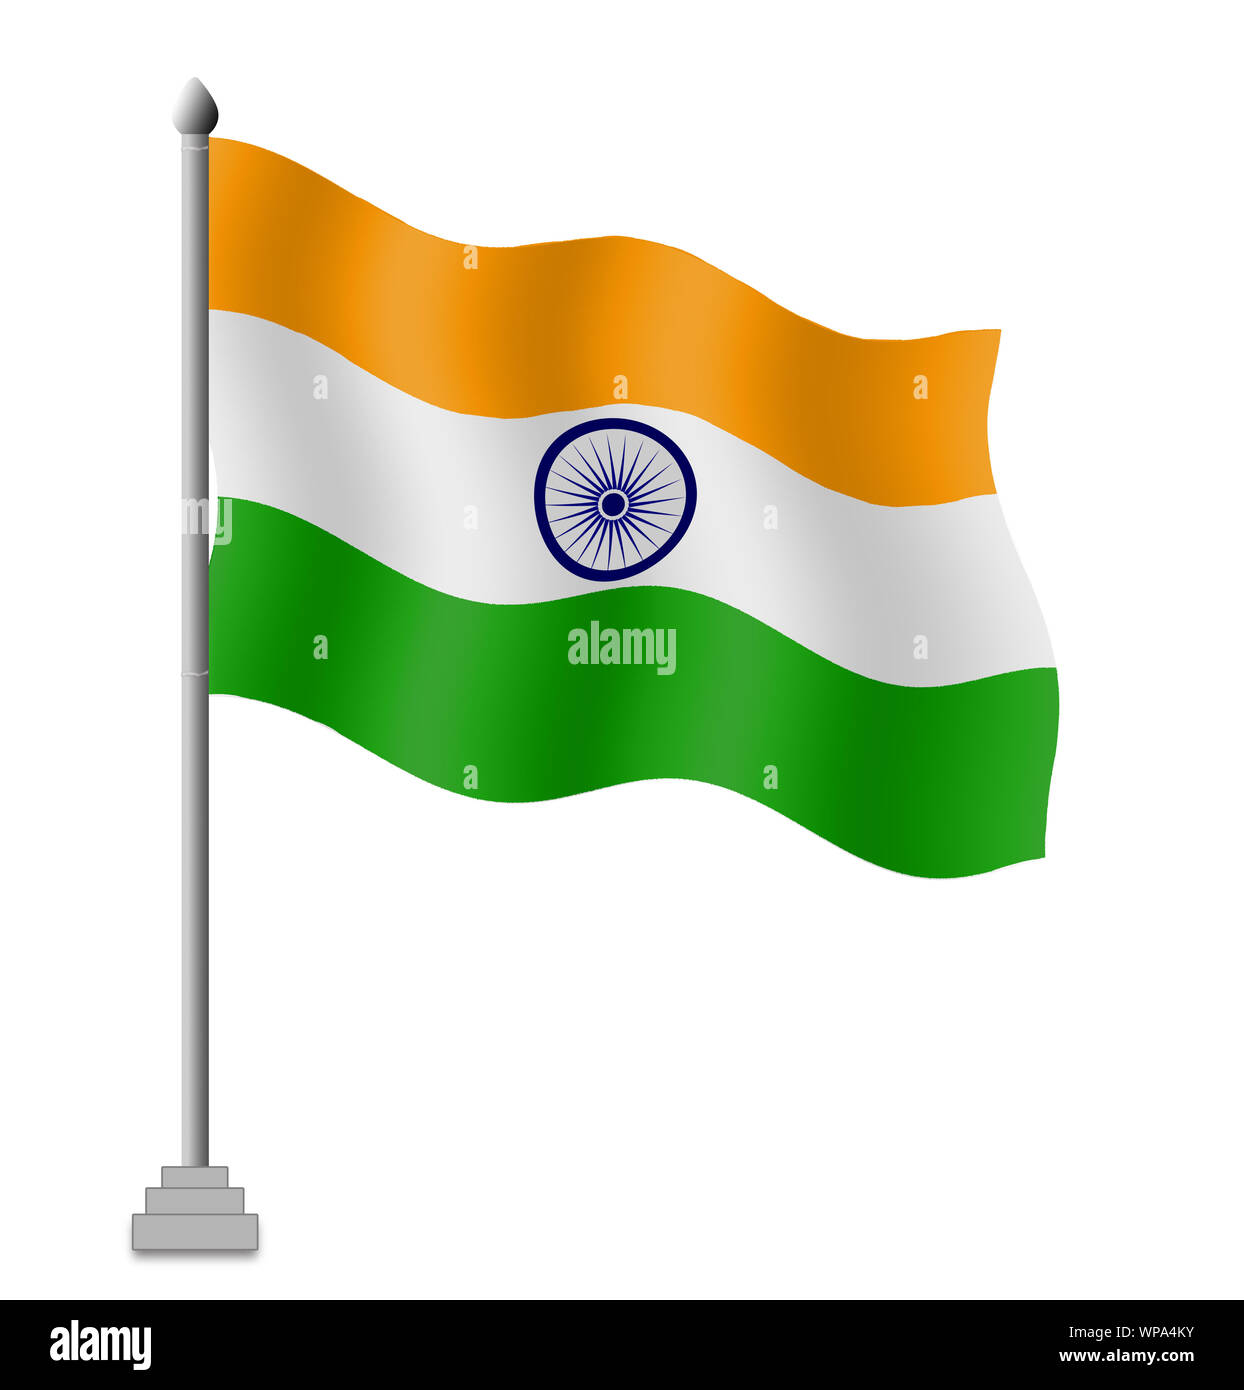 Illustration of an Indian flag flapping Stock Photo